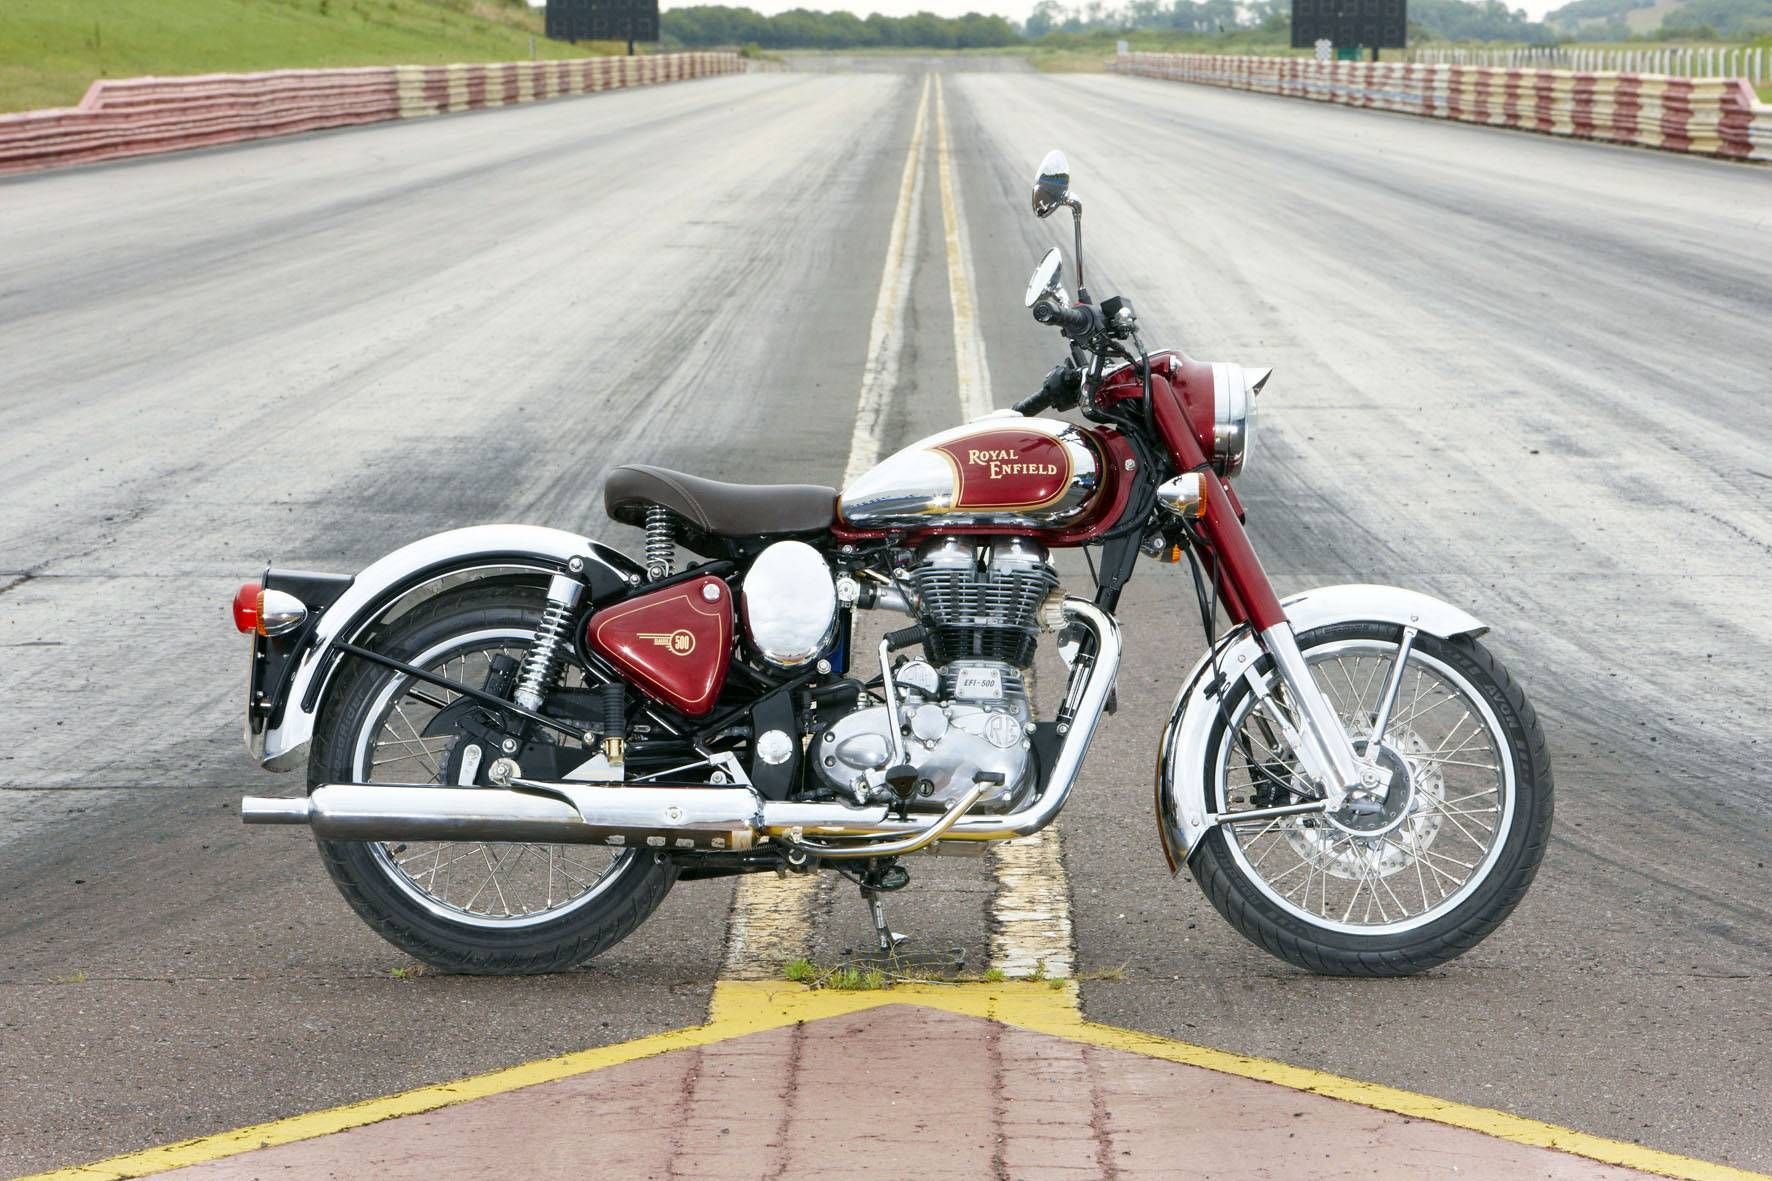 My fav Indian classic chrome 500 I own one color. Royal enfield bullet, Royal enfield wallpaper, Royal enfield classic 350cc